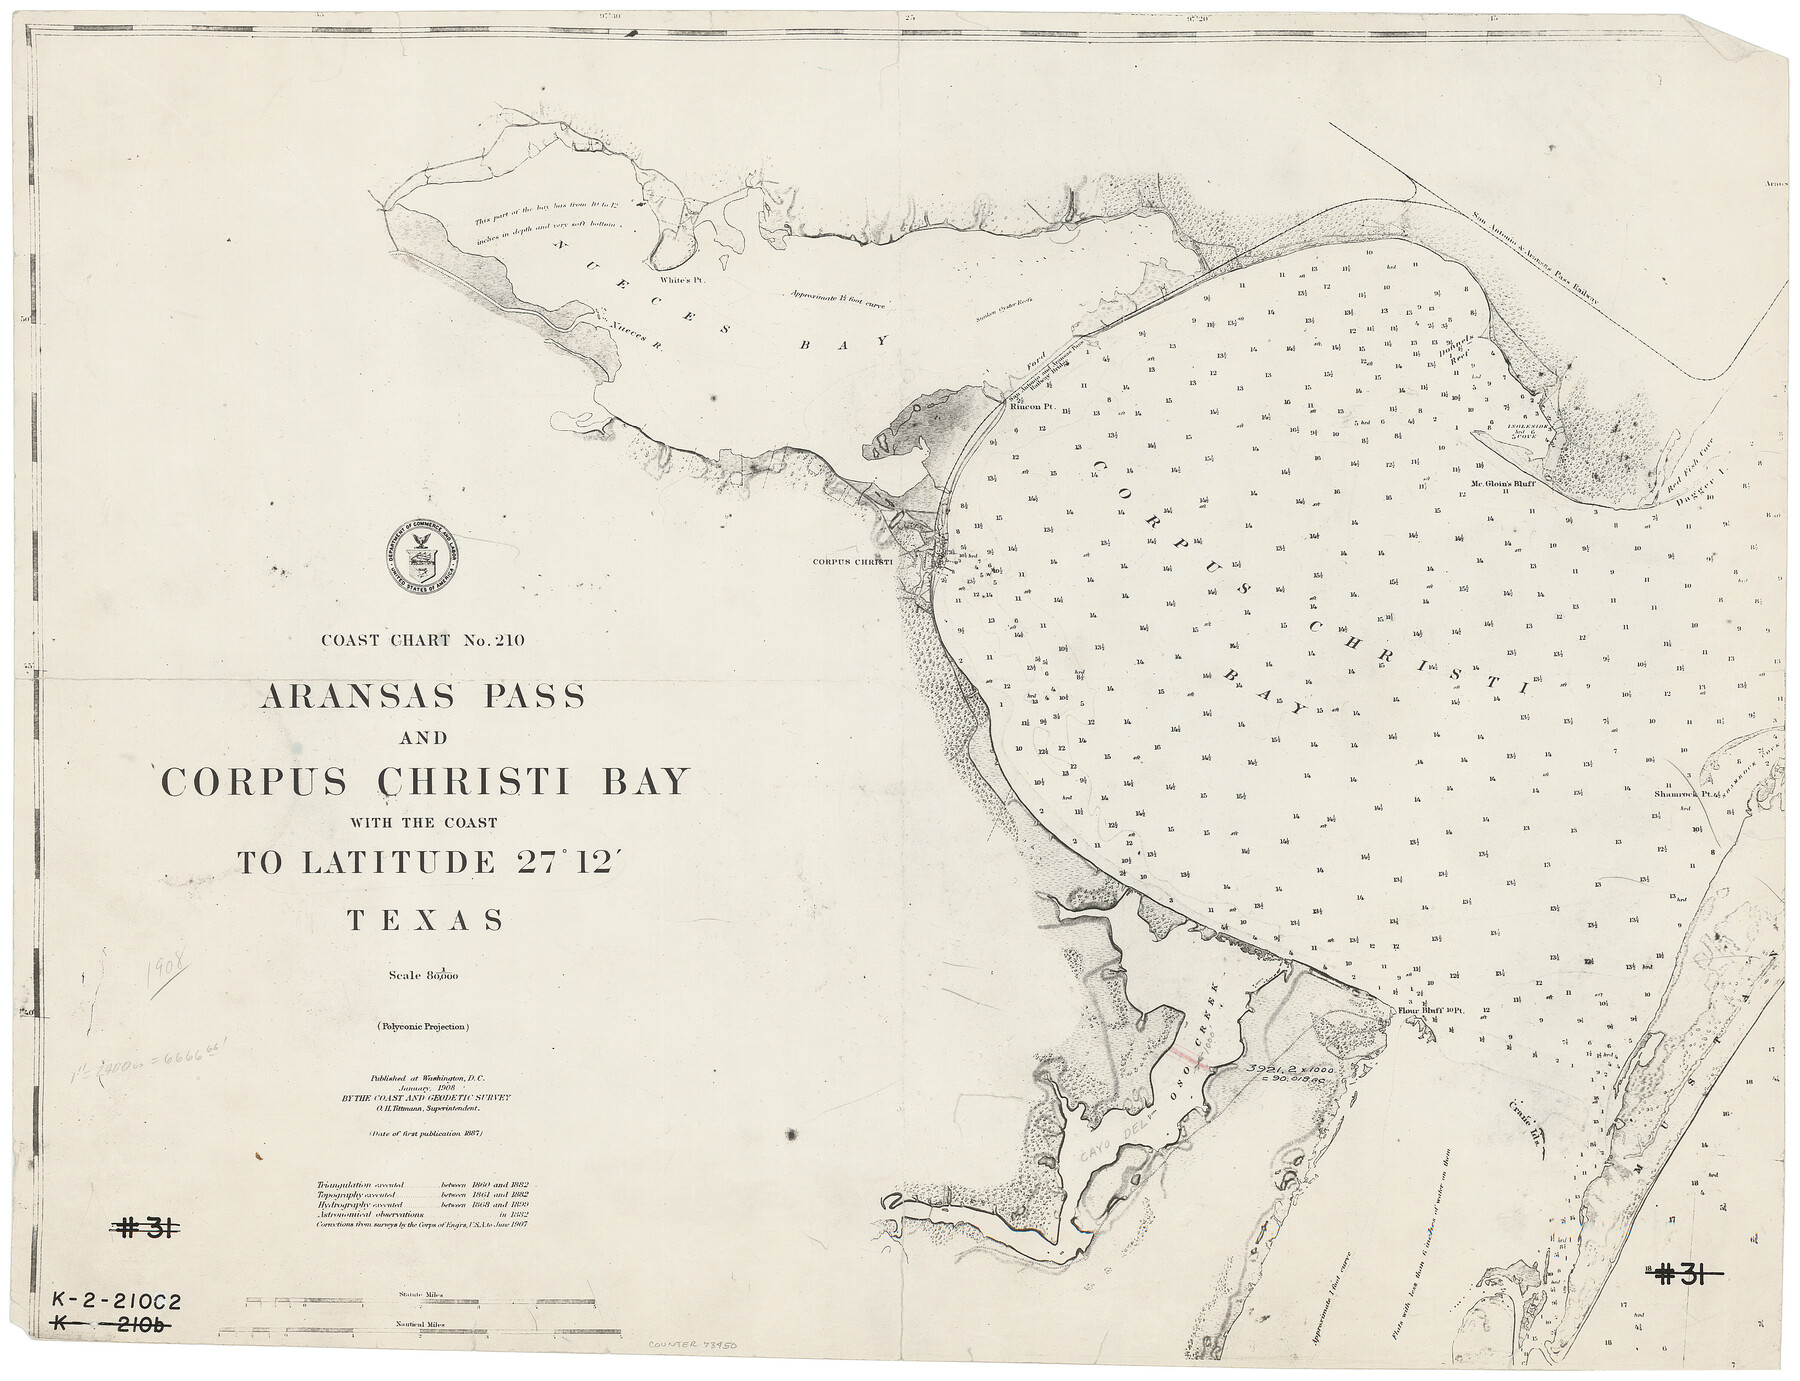 73450, Coast Chart No. 210 - Aransas Pass and Corpus Christi Bay with the coast to latitude 27° 12', Texas, General Map Collection